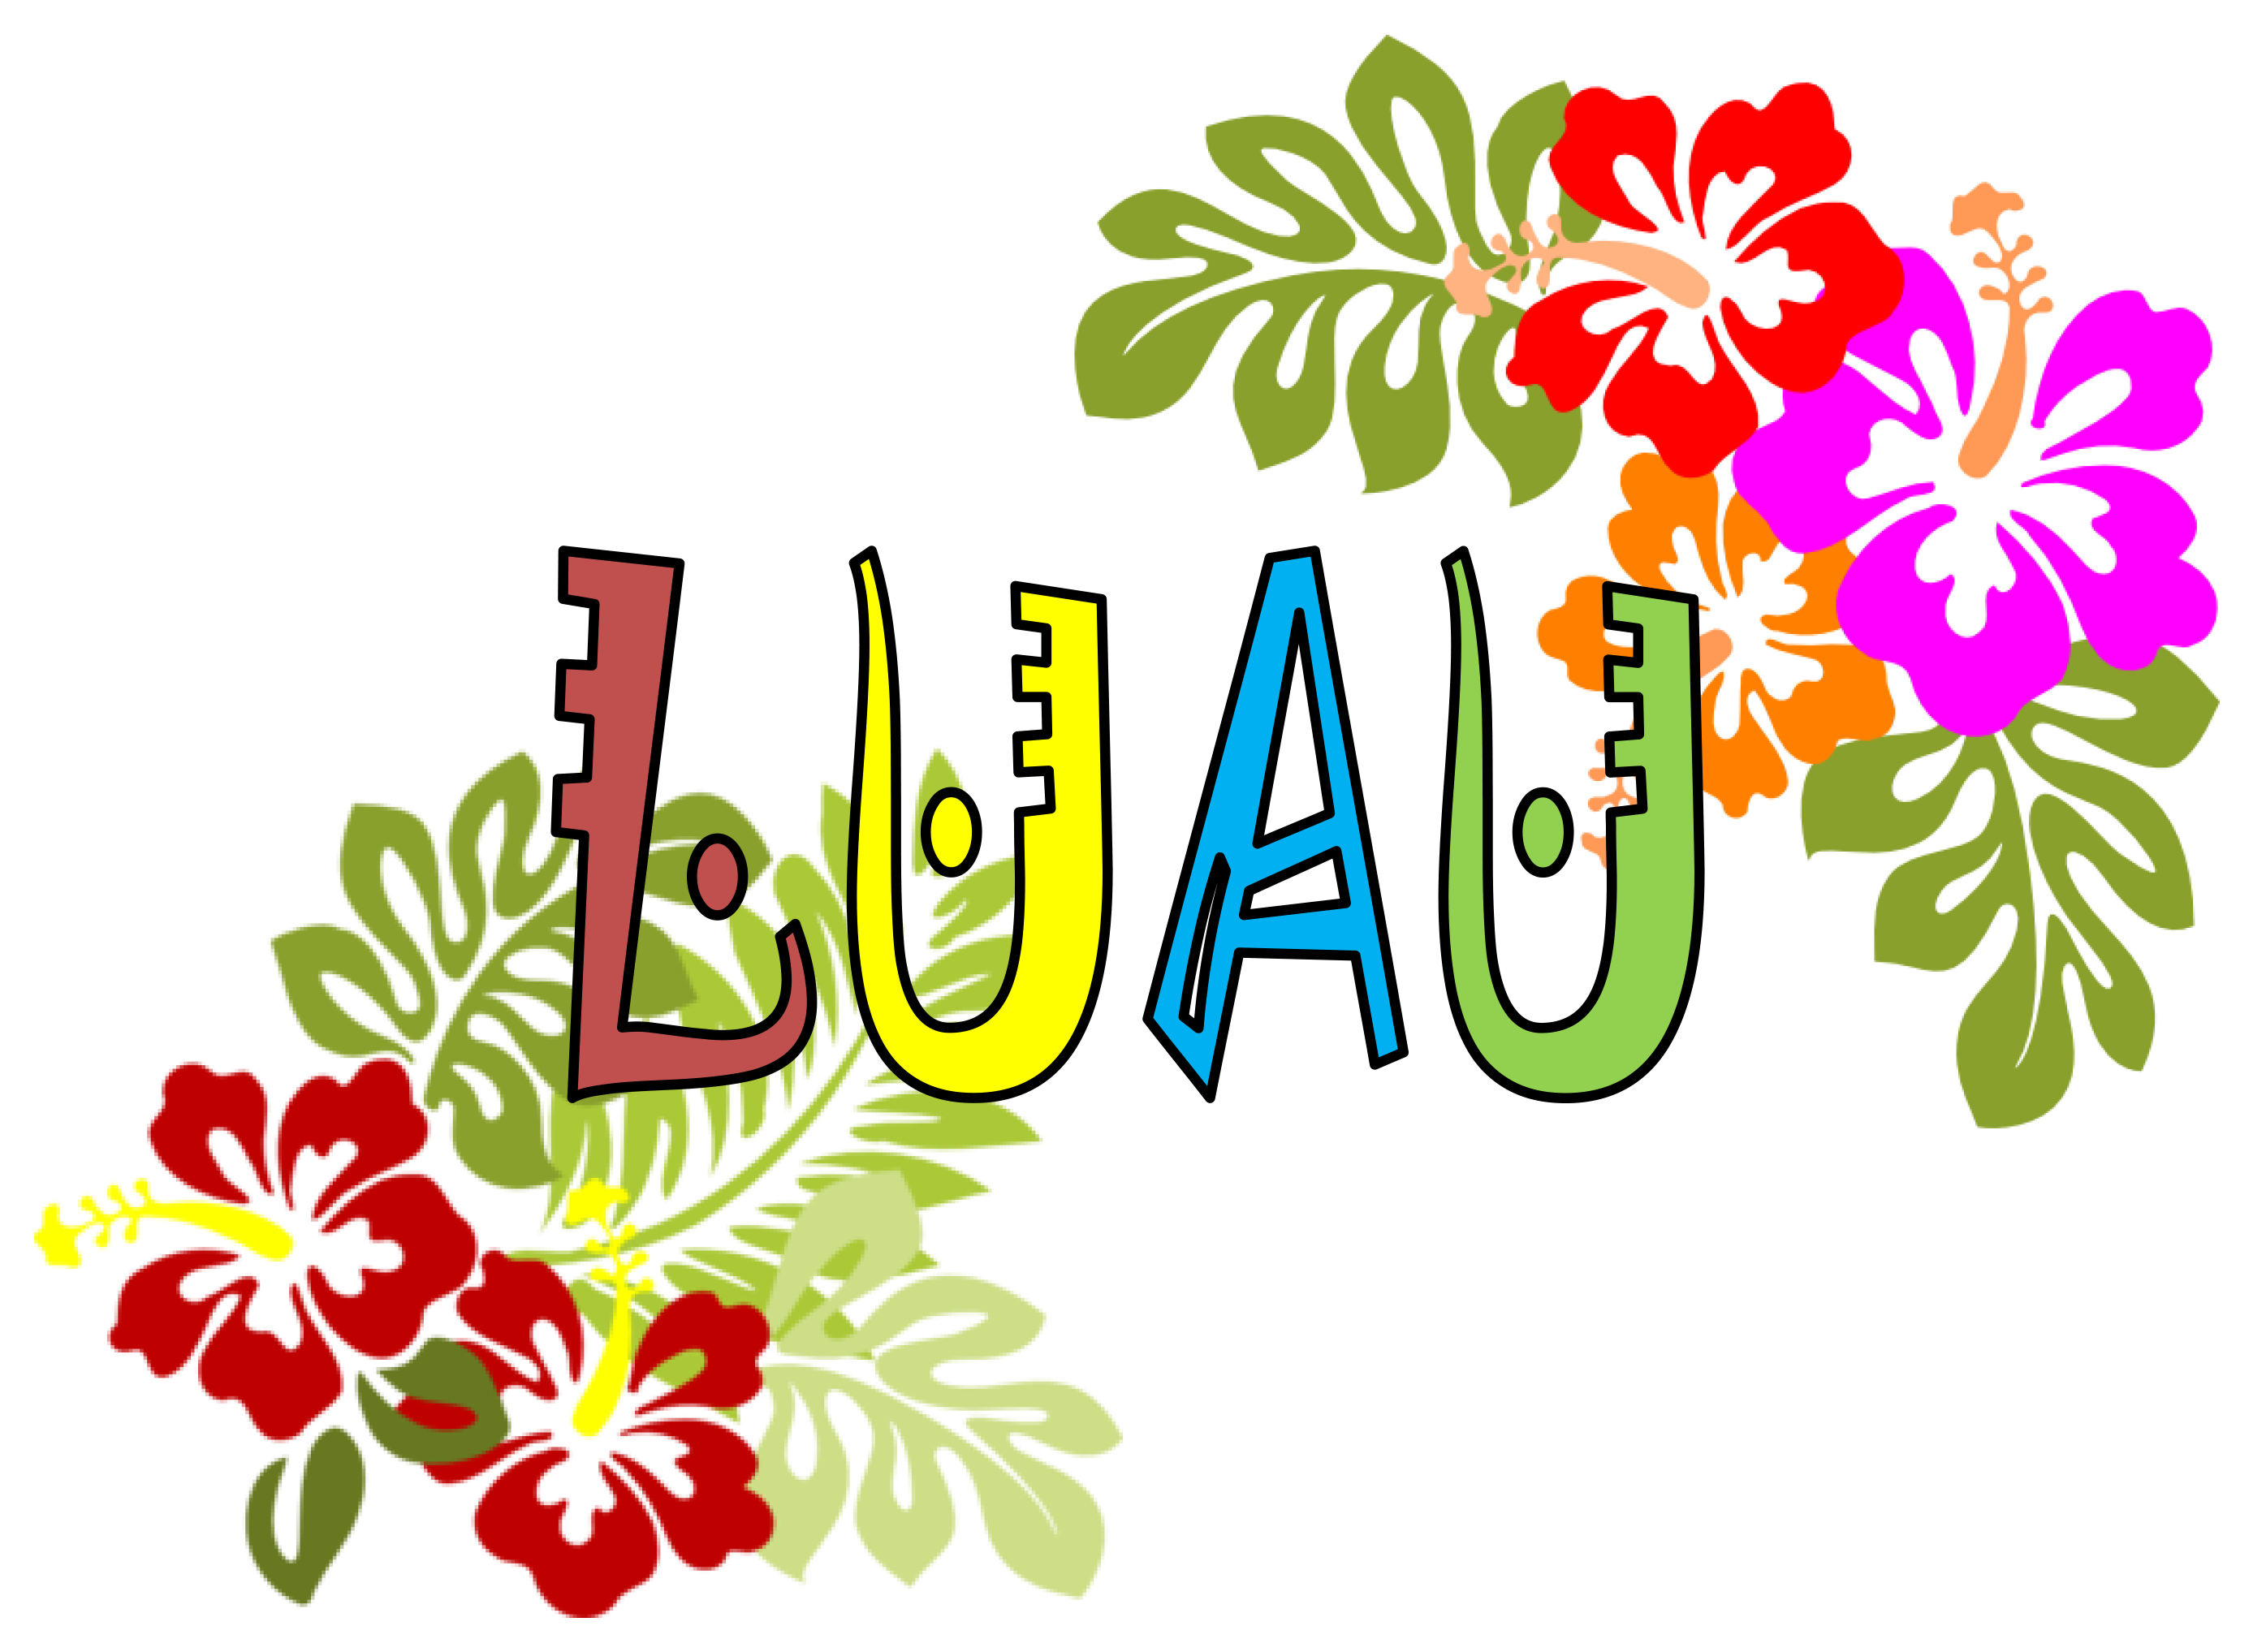 Luau Dinner Dance Sponsored By The Filipino Association - Luau Images, Transparent background PNG HD thumbnail